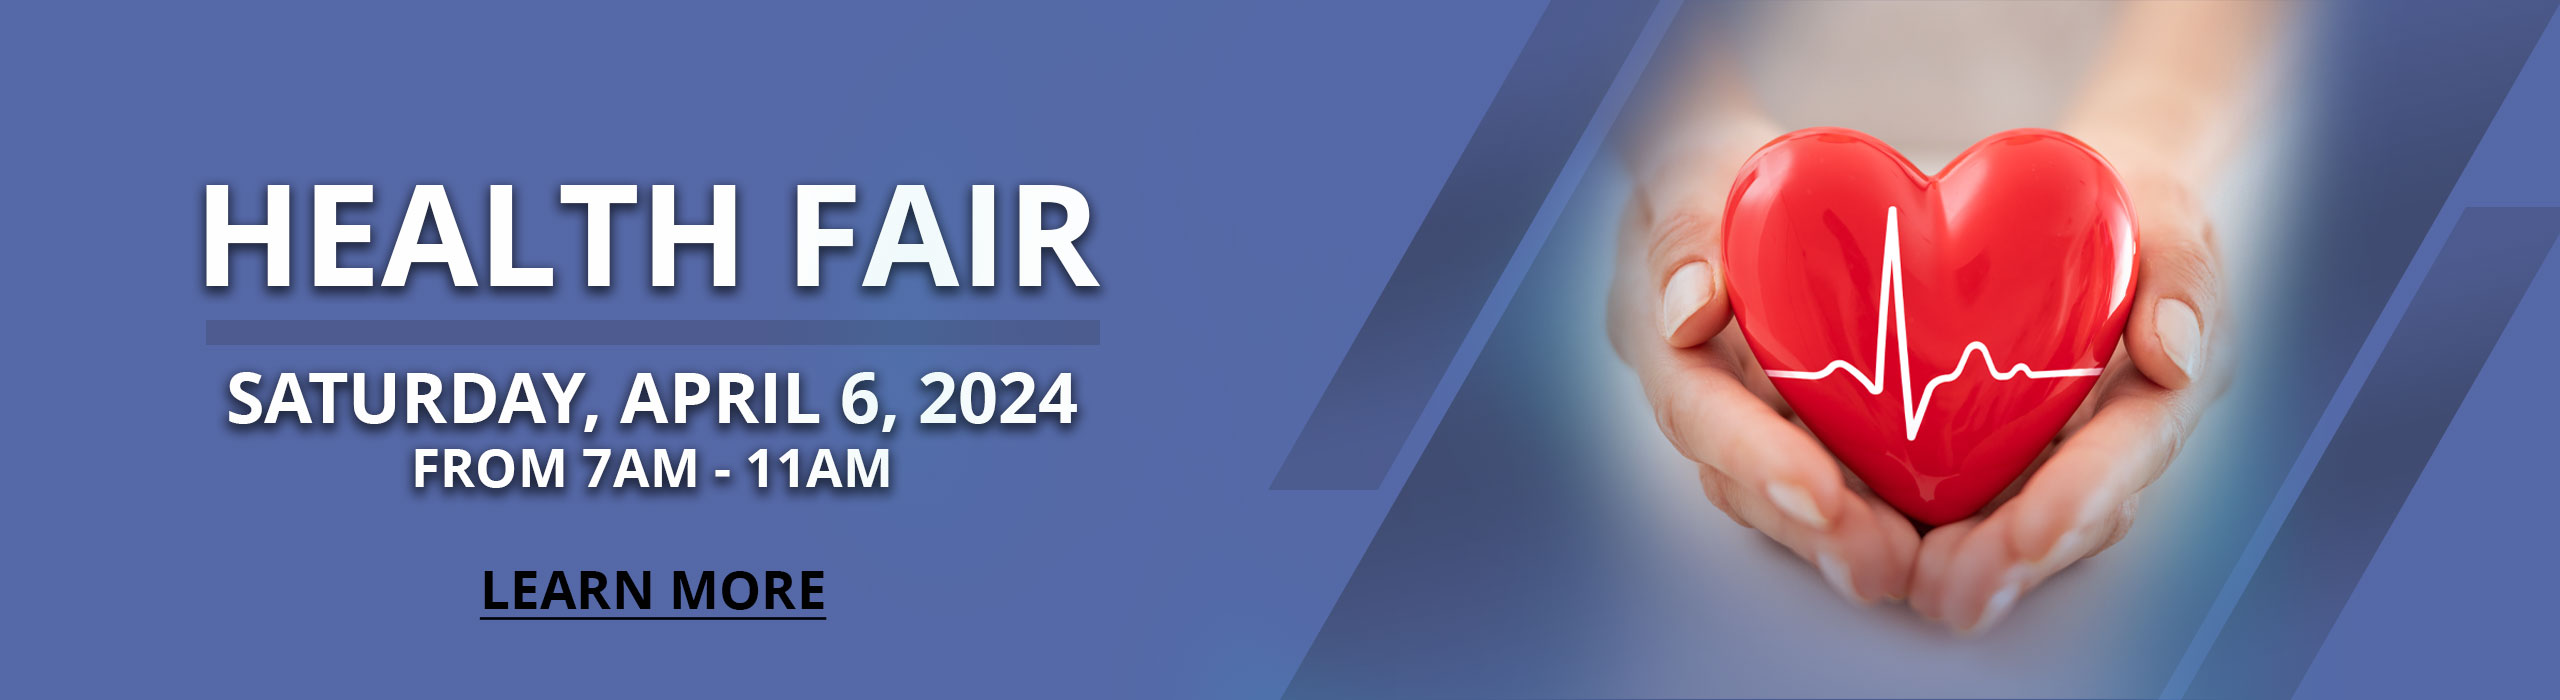 2024 HEALTH FAIR IS APRIL 6TH. CLICK HERE TO FIND OUT MORE!